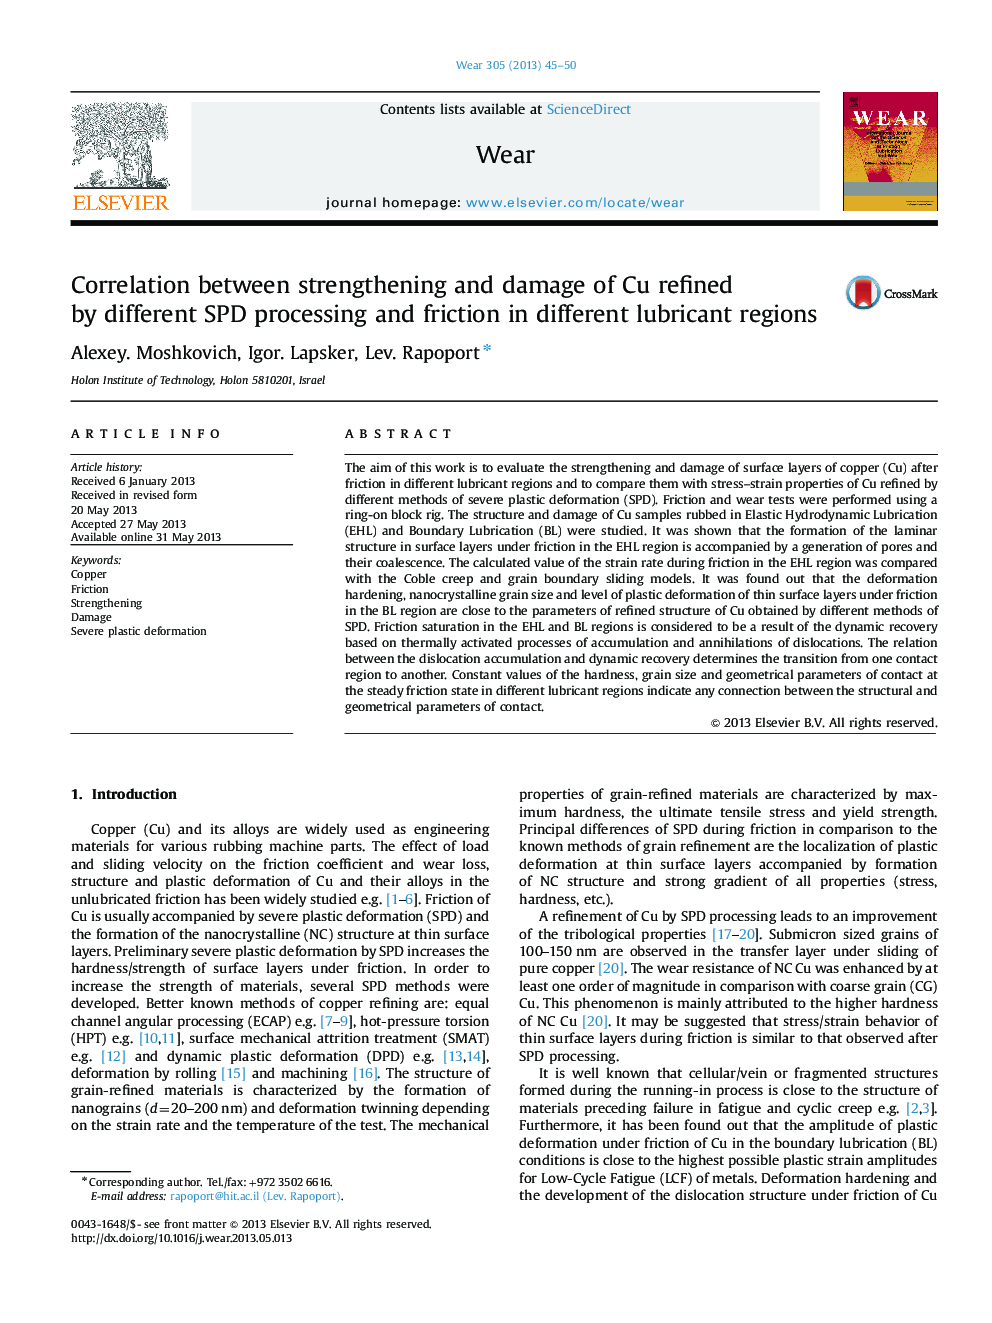 Correlation between strengthening and damage of Cu refined by different SPD processing and friction in different lubricant regions